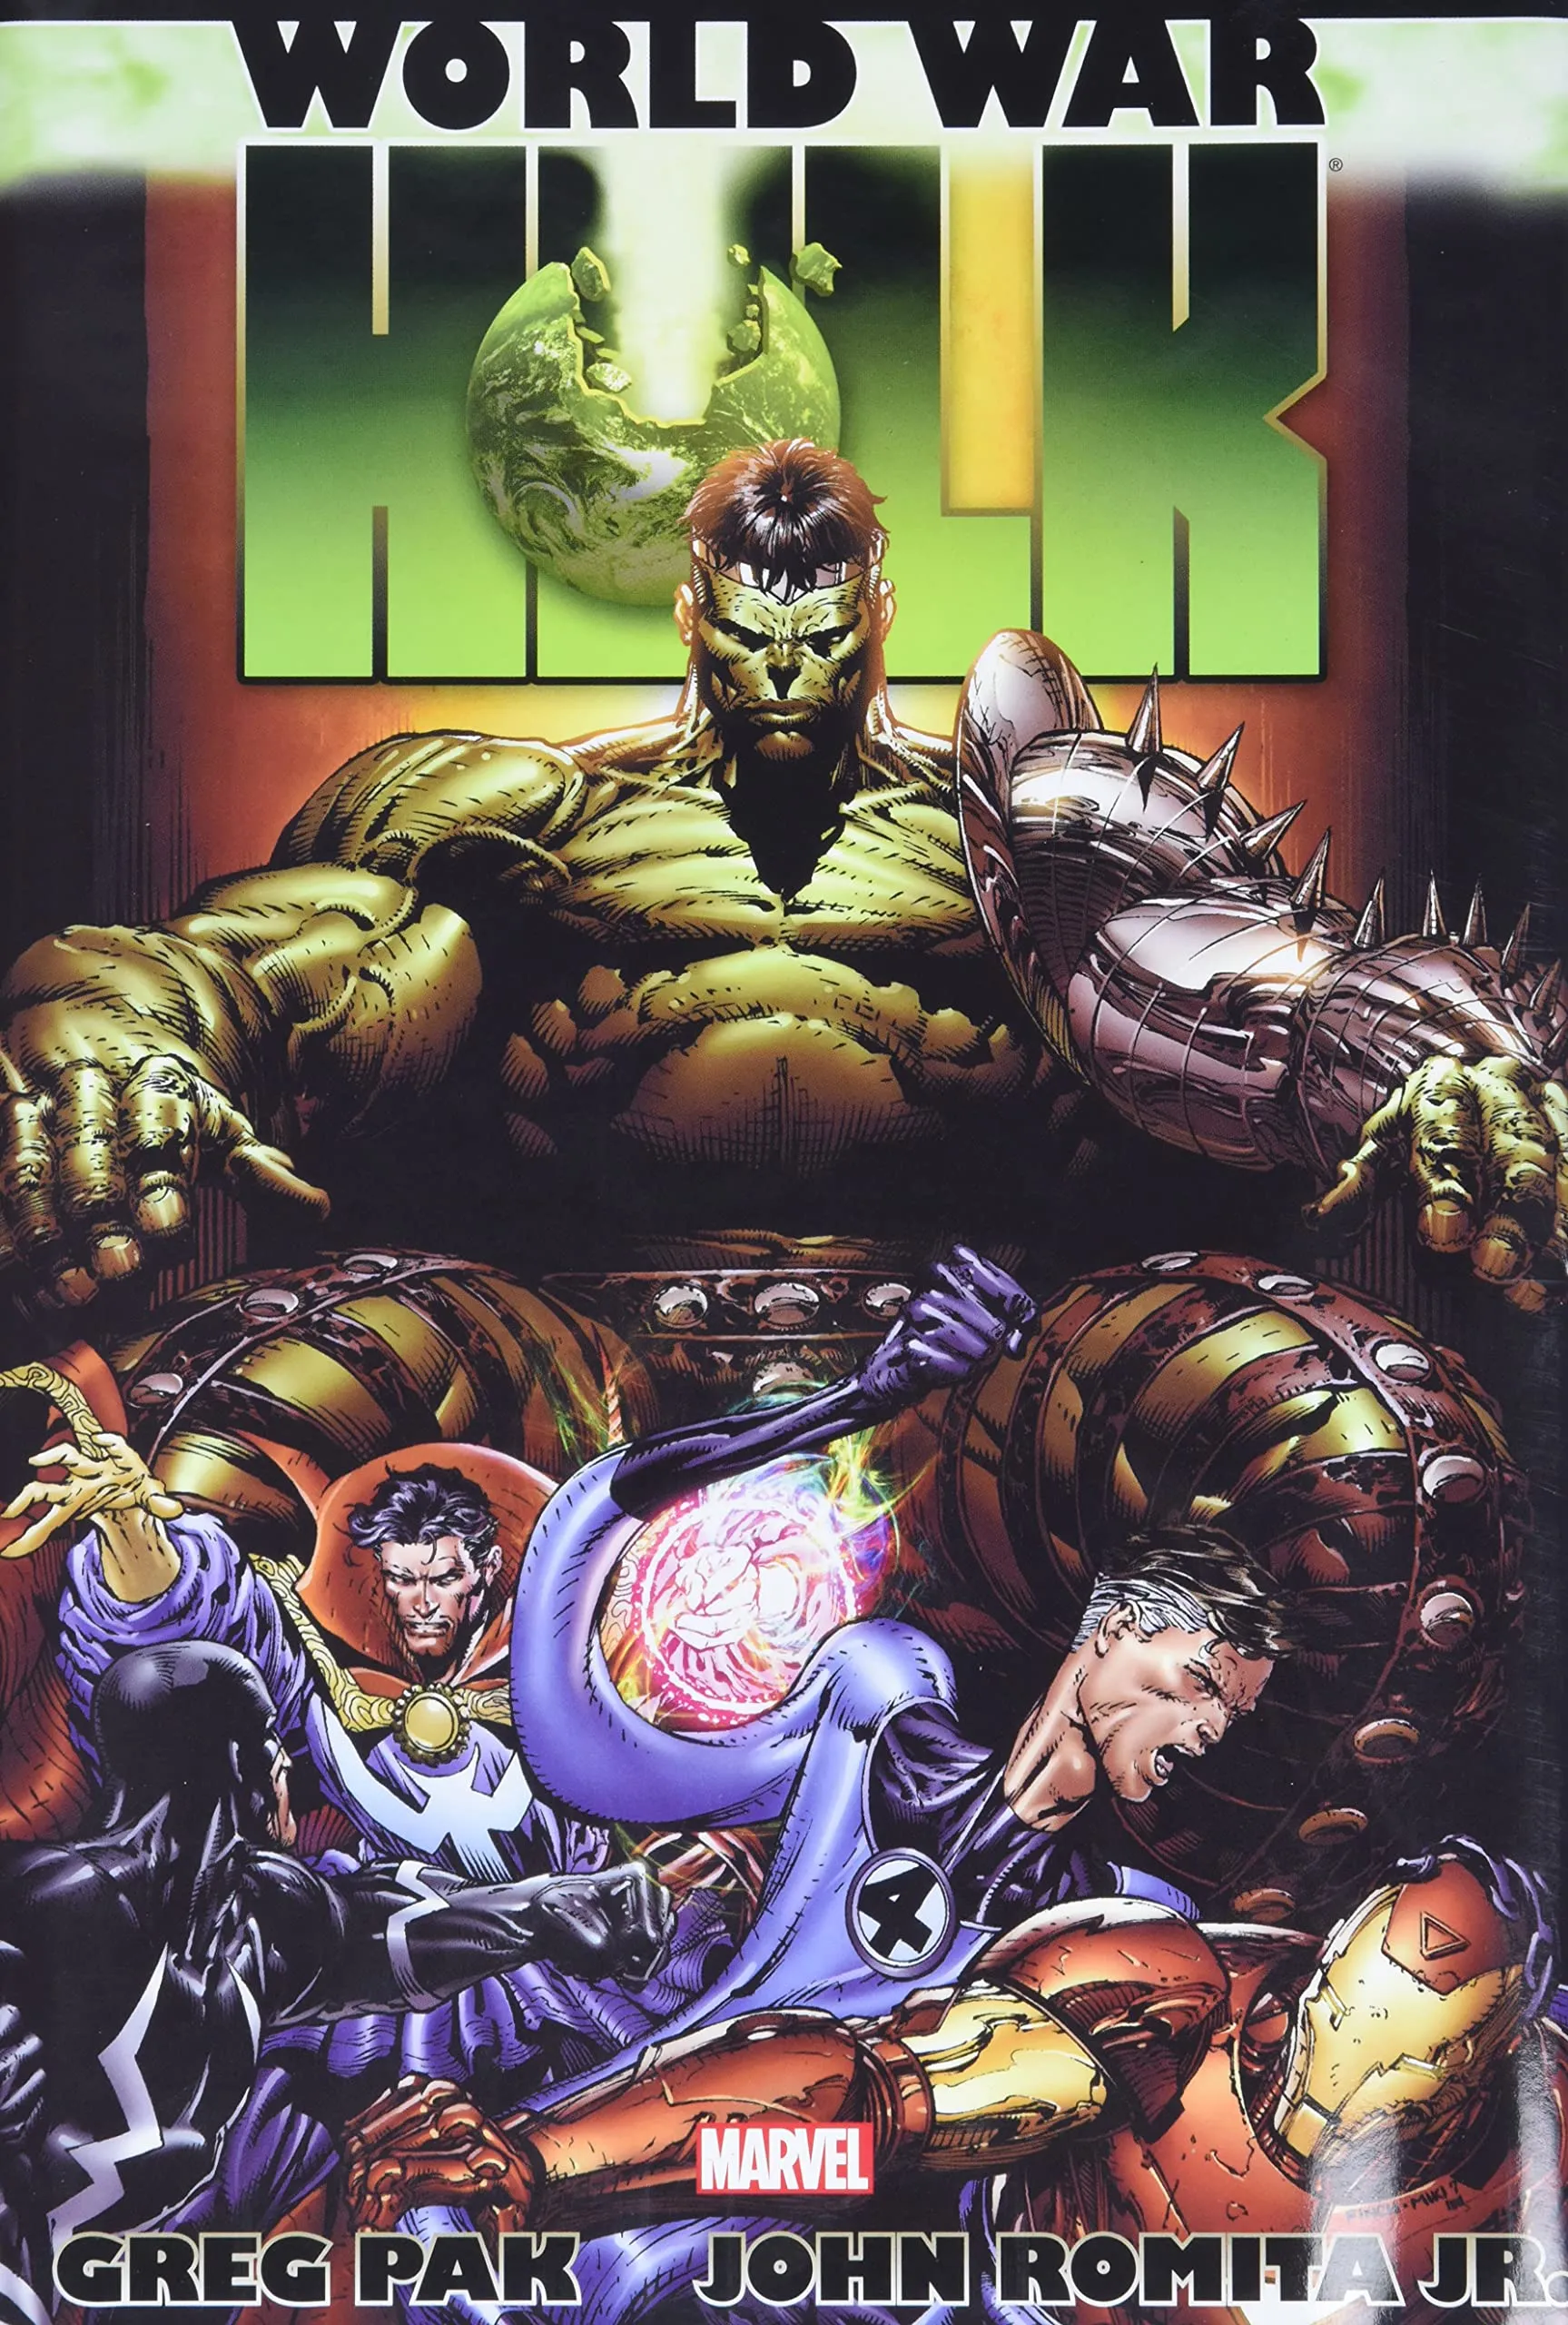 'Hulk' solo film distribution rights are rumored to return to Marvel next year | FMV6